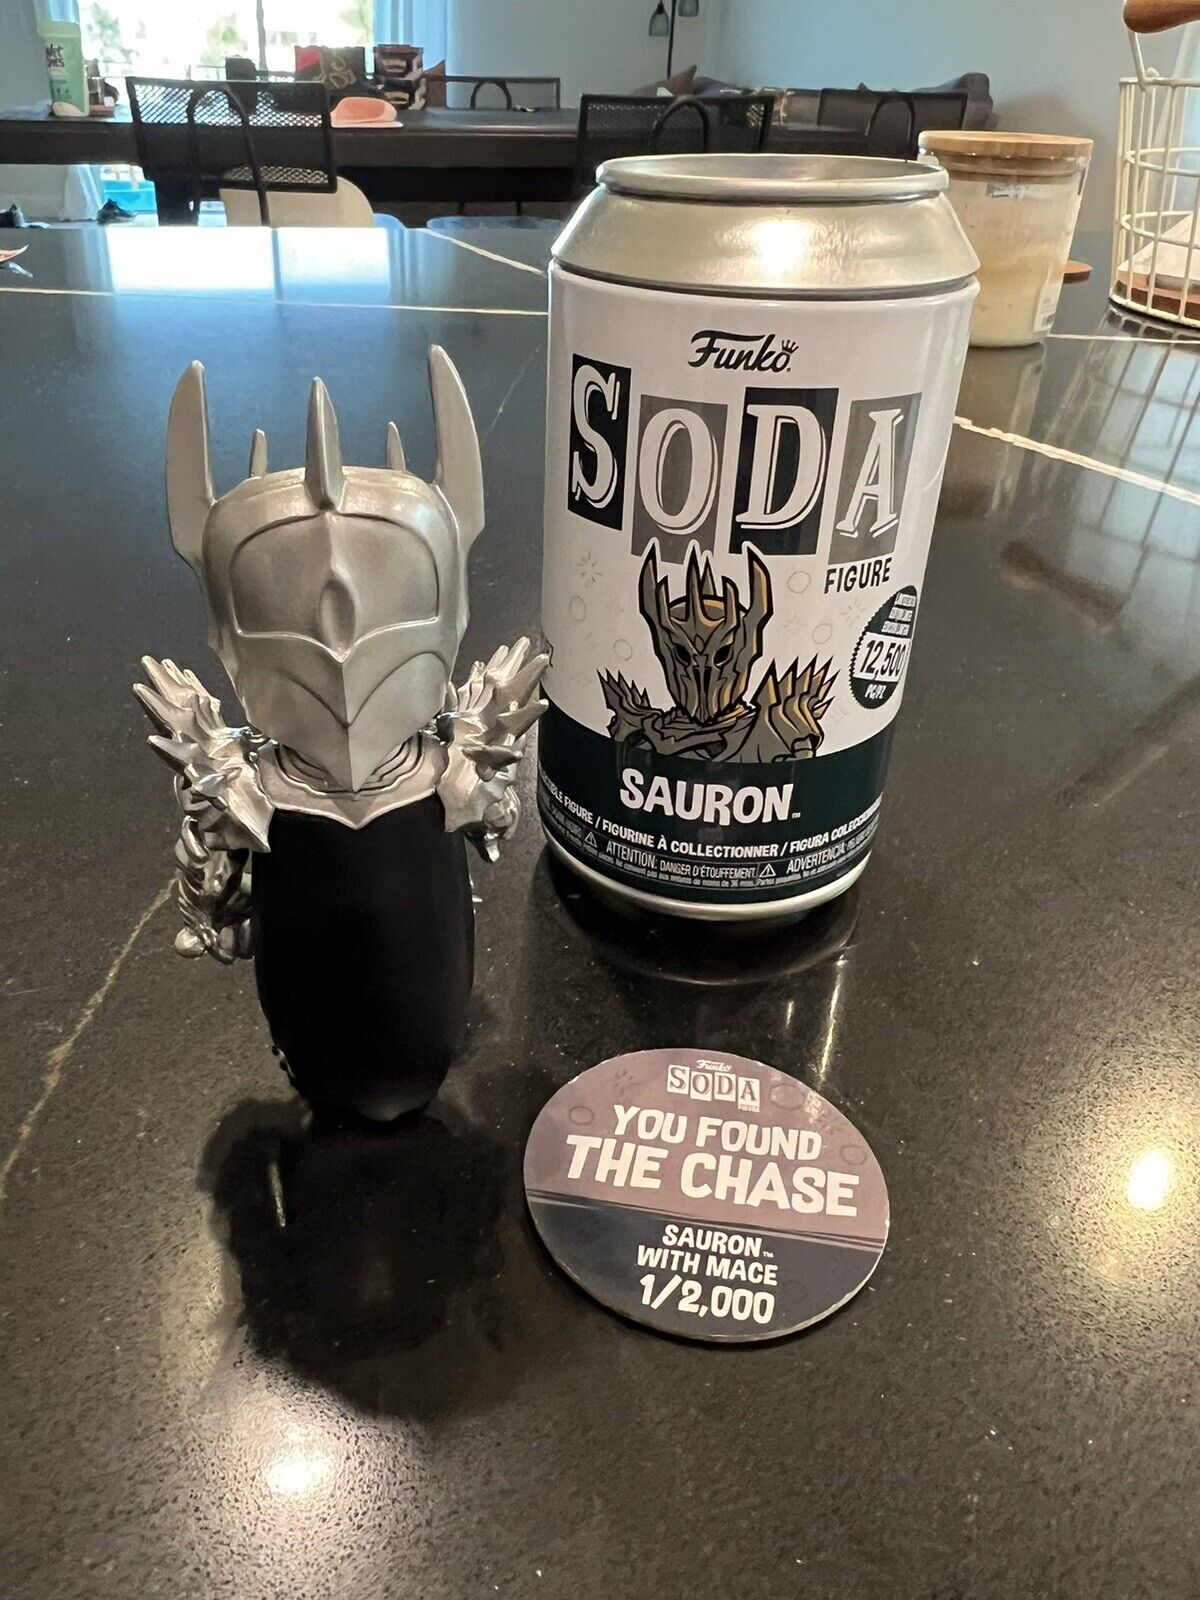 Funko Vinyl Soda The Lord of the Rings: Sauron LE Figure CHASE